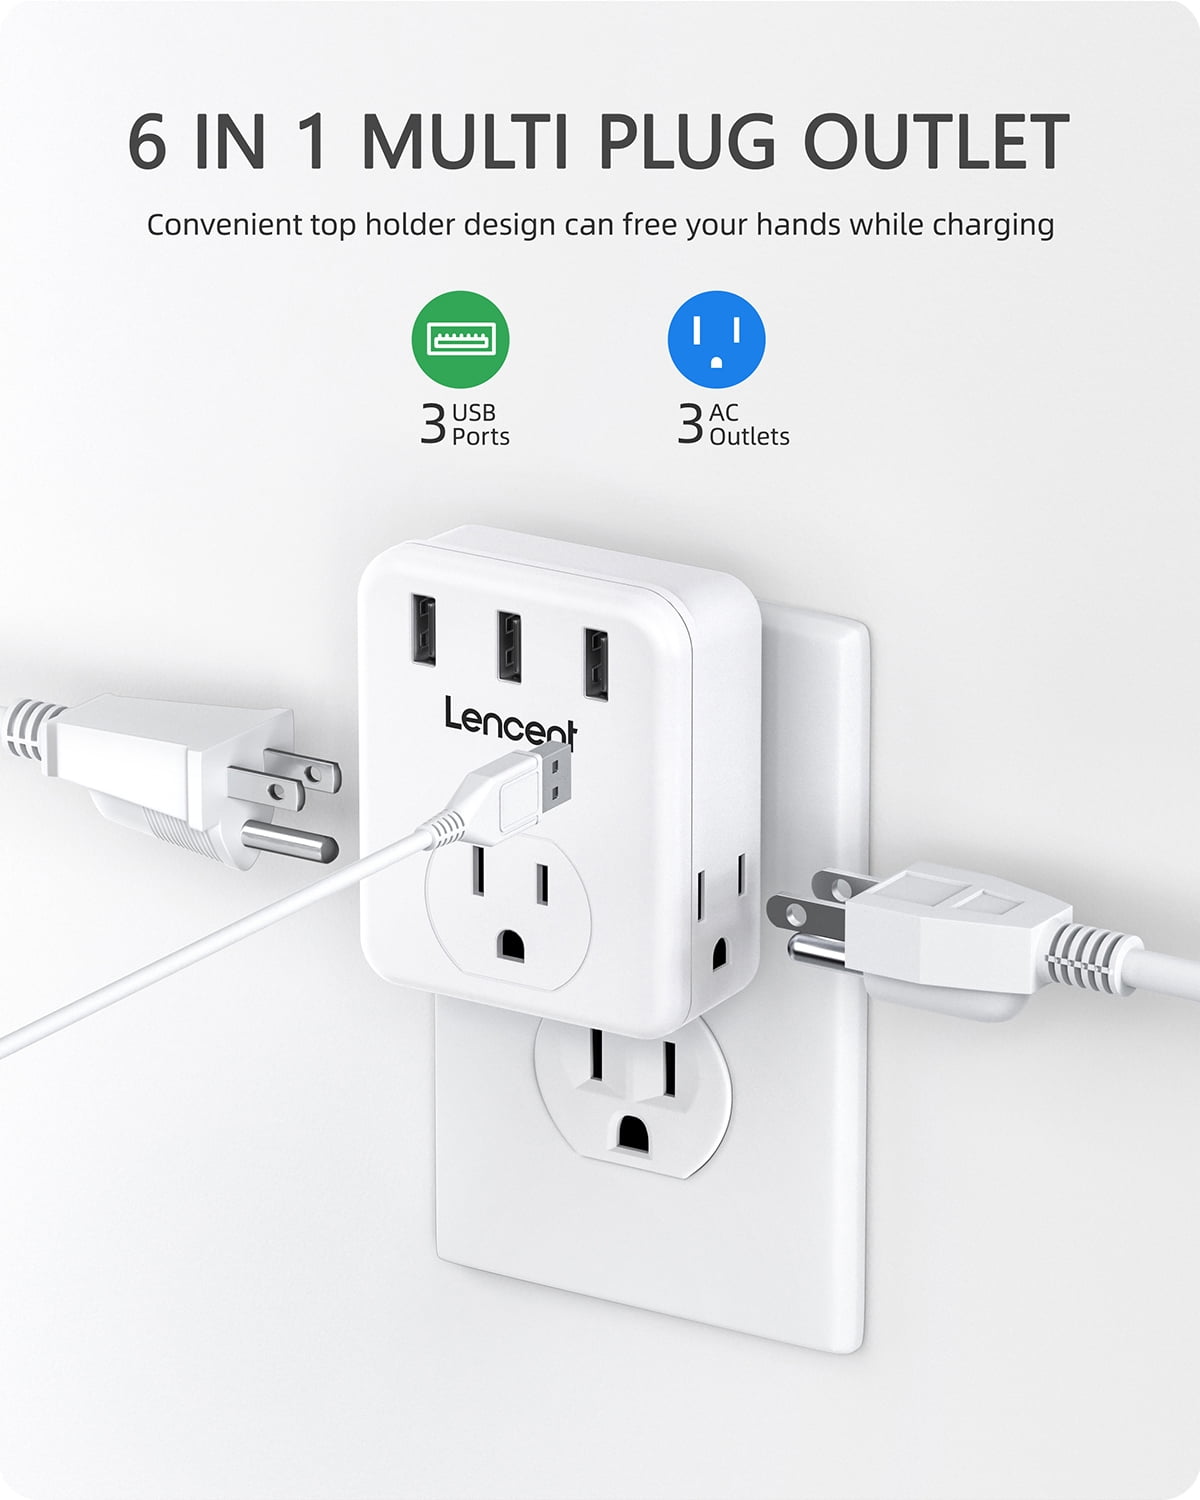  USB Wall Charger, LENCENT Wall Adapter with AC Outlet and 3 USB  Ports, Cube Power Strip Extender Plug Expander with Multiple USB Charger,  NO Surge Protector for Travel Cruise Ship, Home